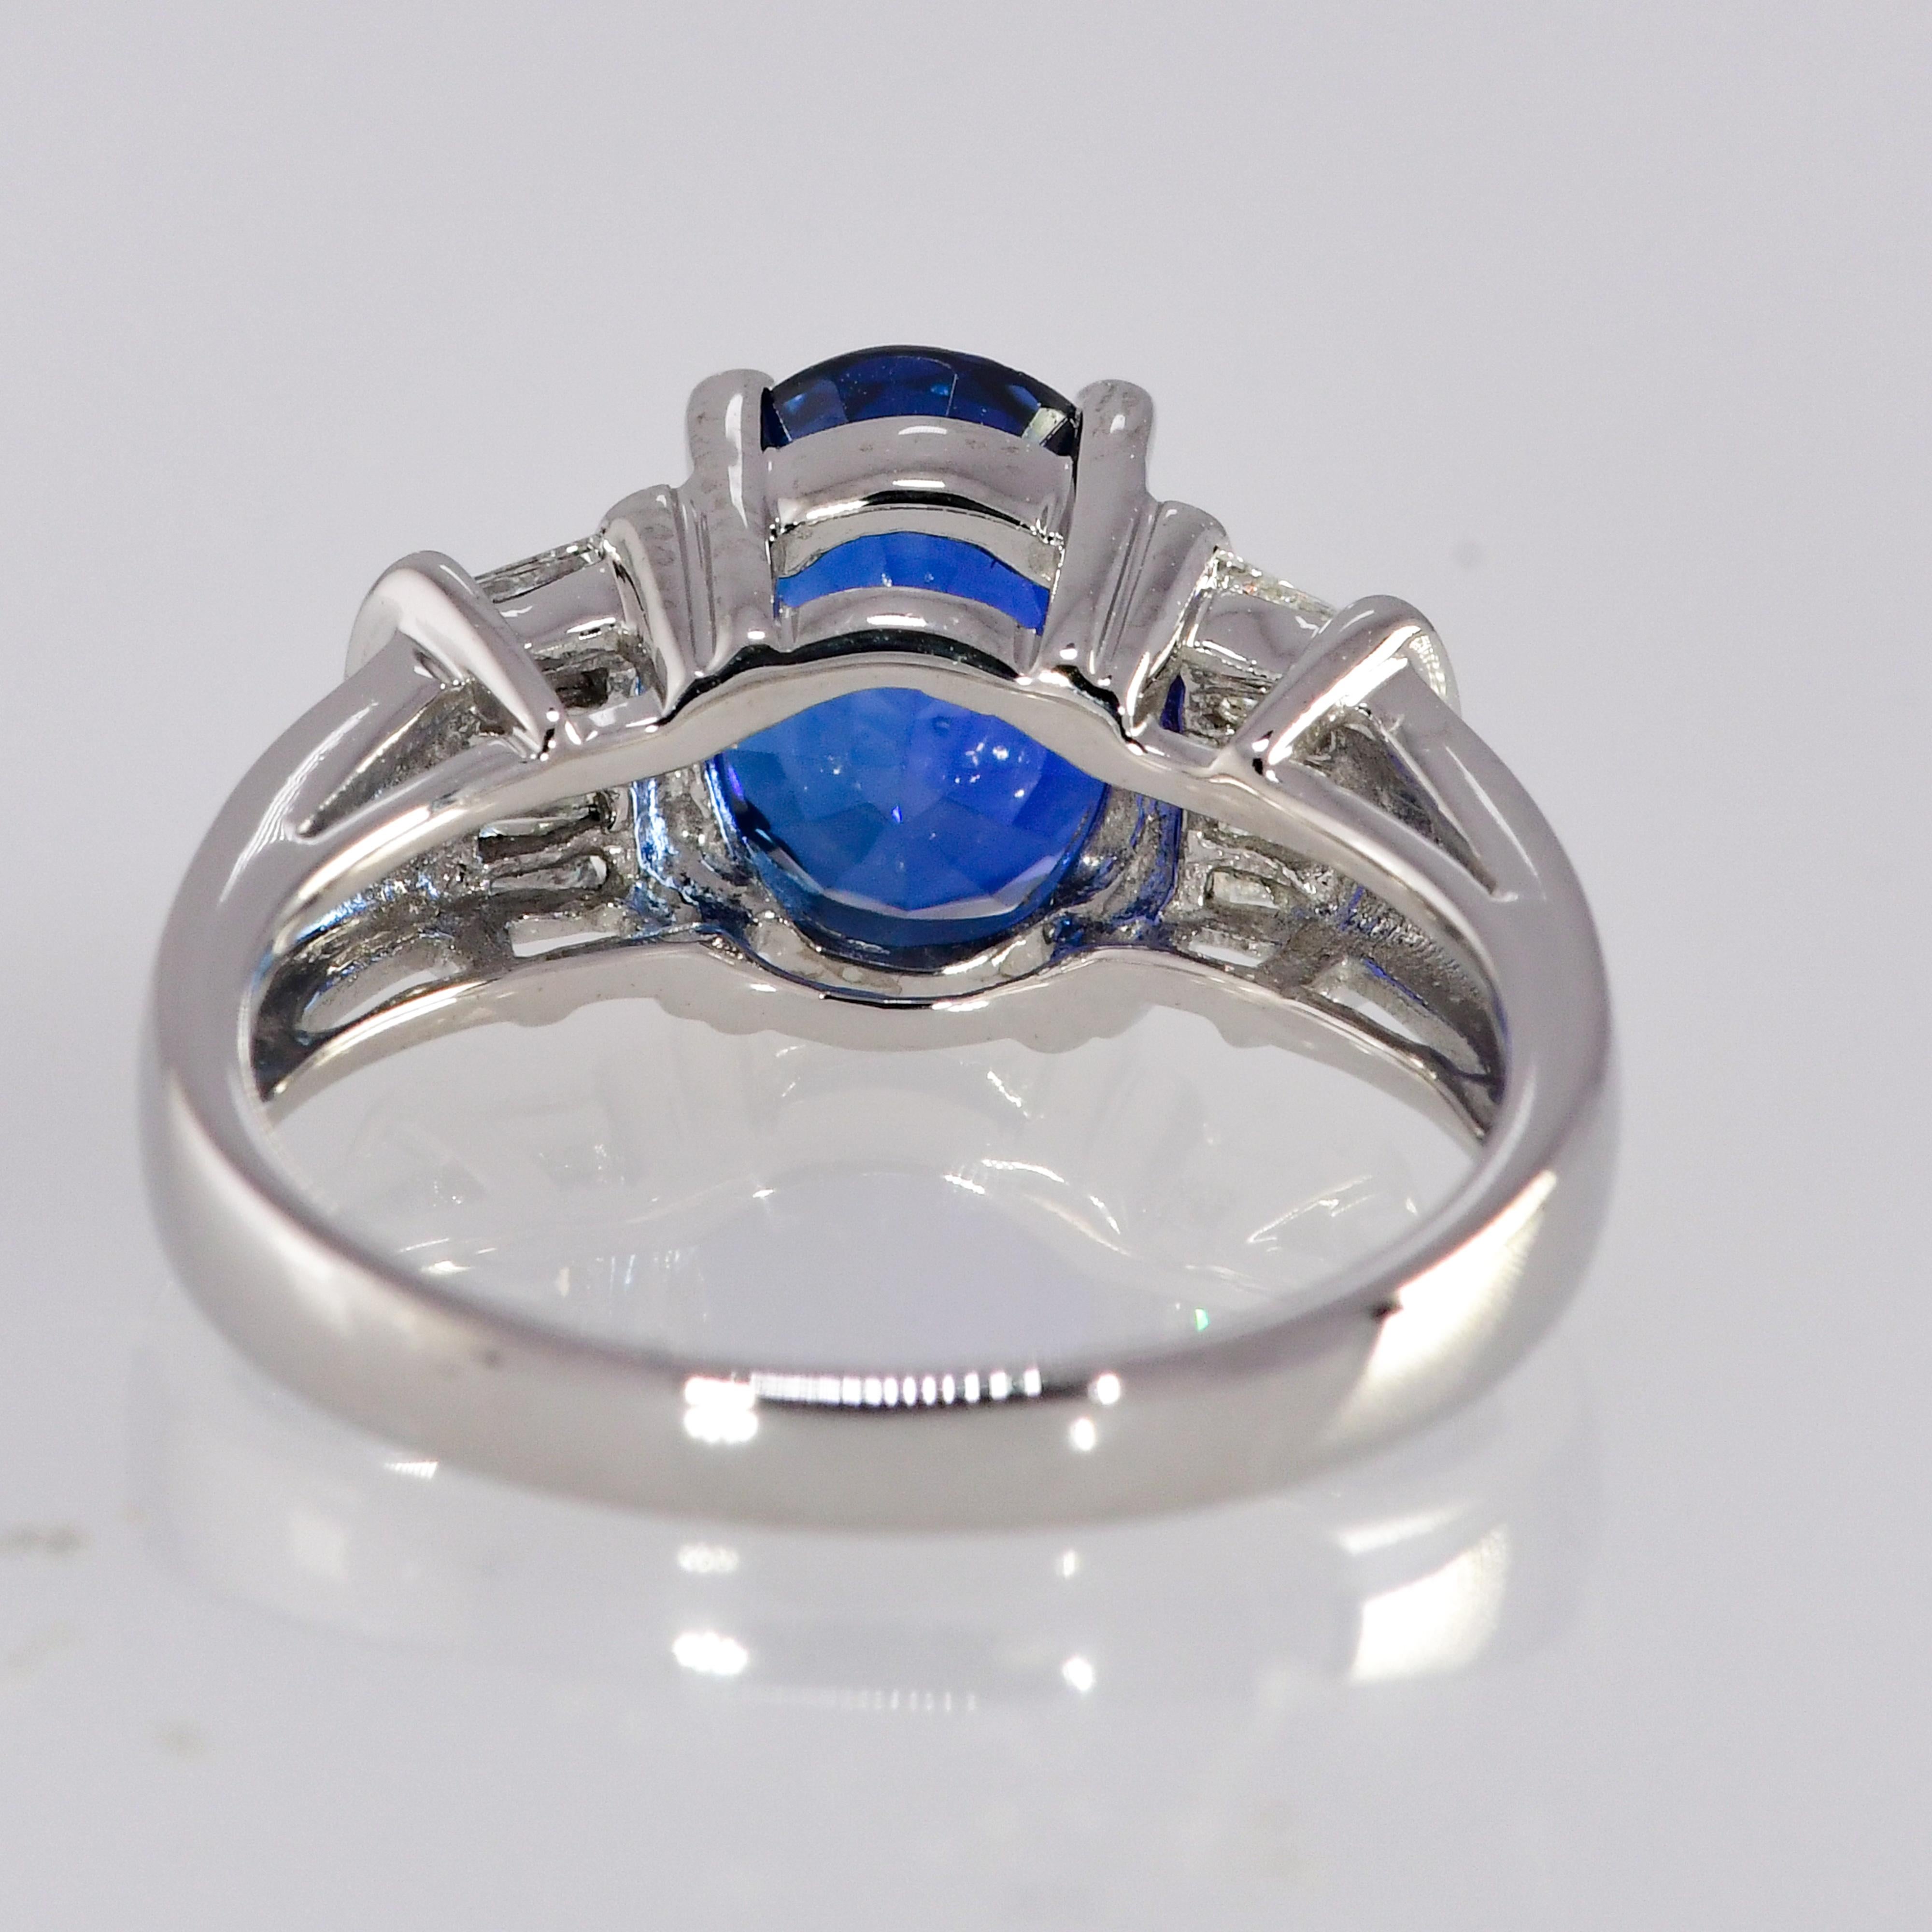 This classic elegant ring contains a deep vibrant diffused blue sapphire ring weighing 2.23 carat with no eye visible inclusions. The sapphire is flanked by 10 baguette diamonds totaling .25 carat. The diamond quality is SI1; G-H. The weight of the